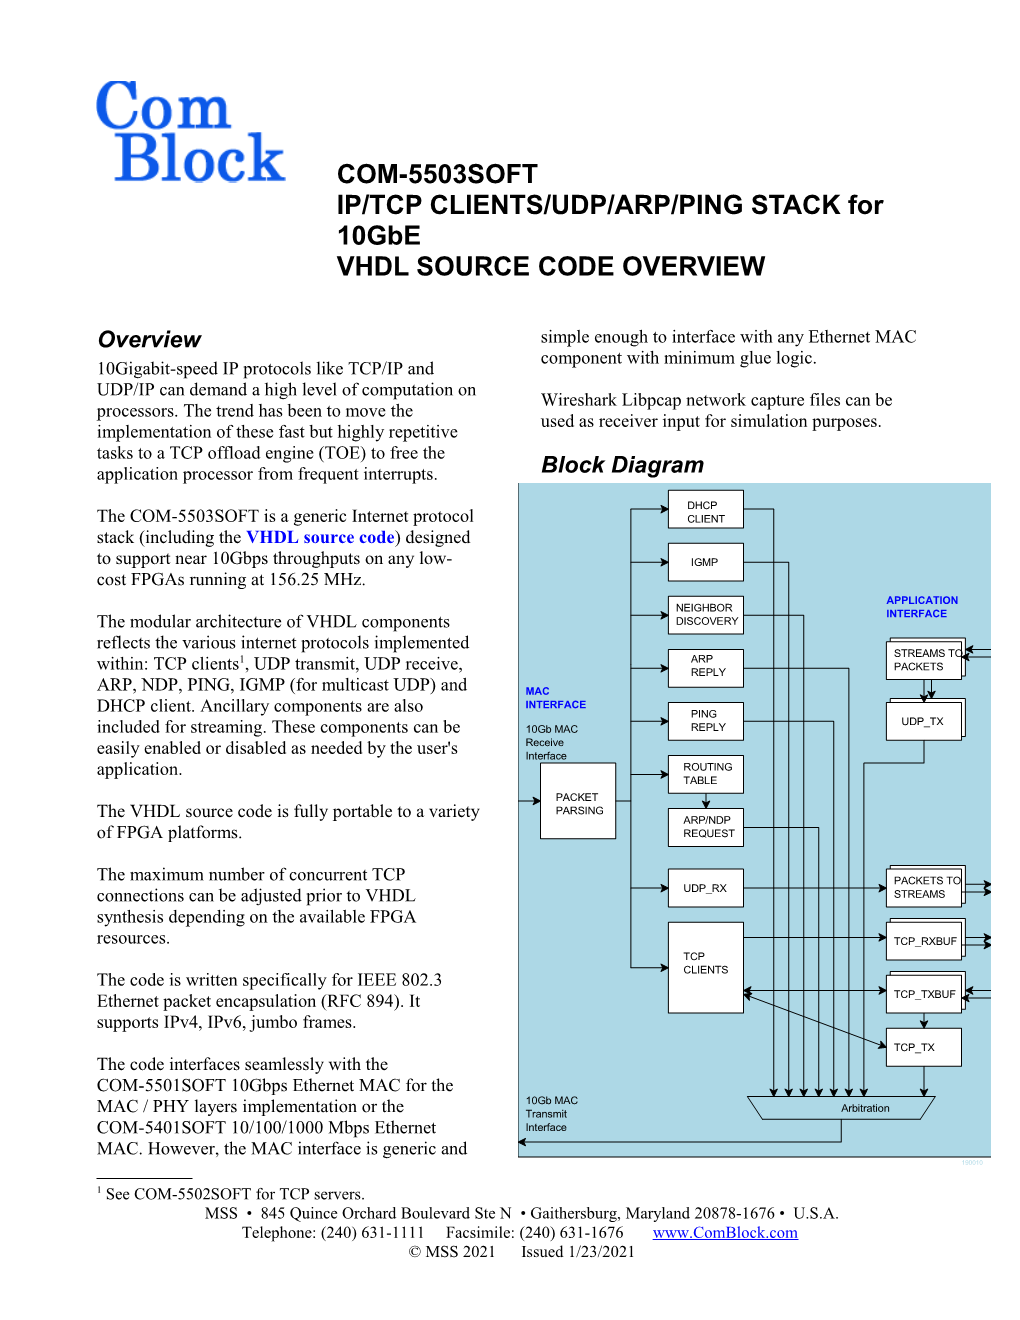 COM-5503SOFT IP Protocol Stack for 10Gbe, VHDL Source Code Overview